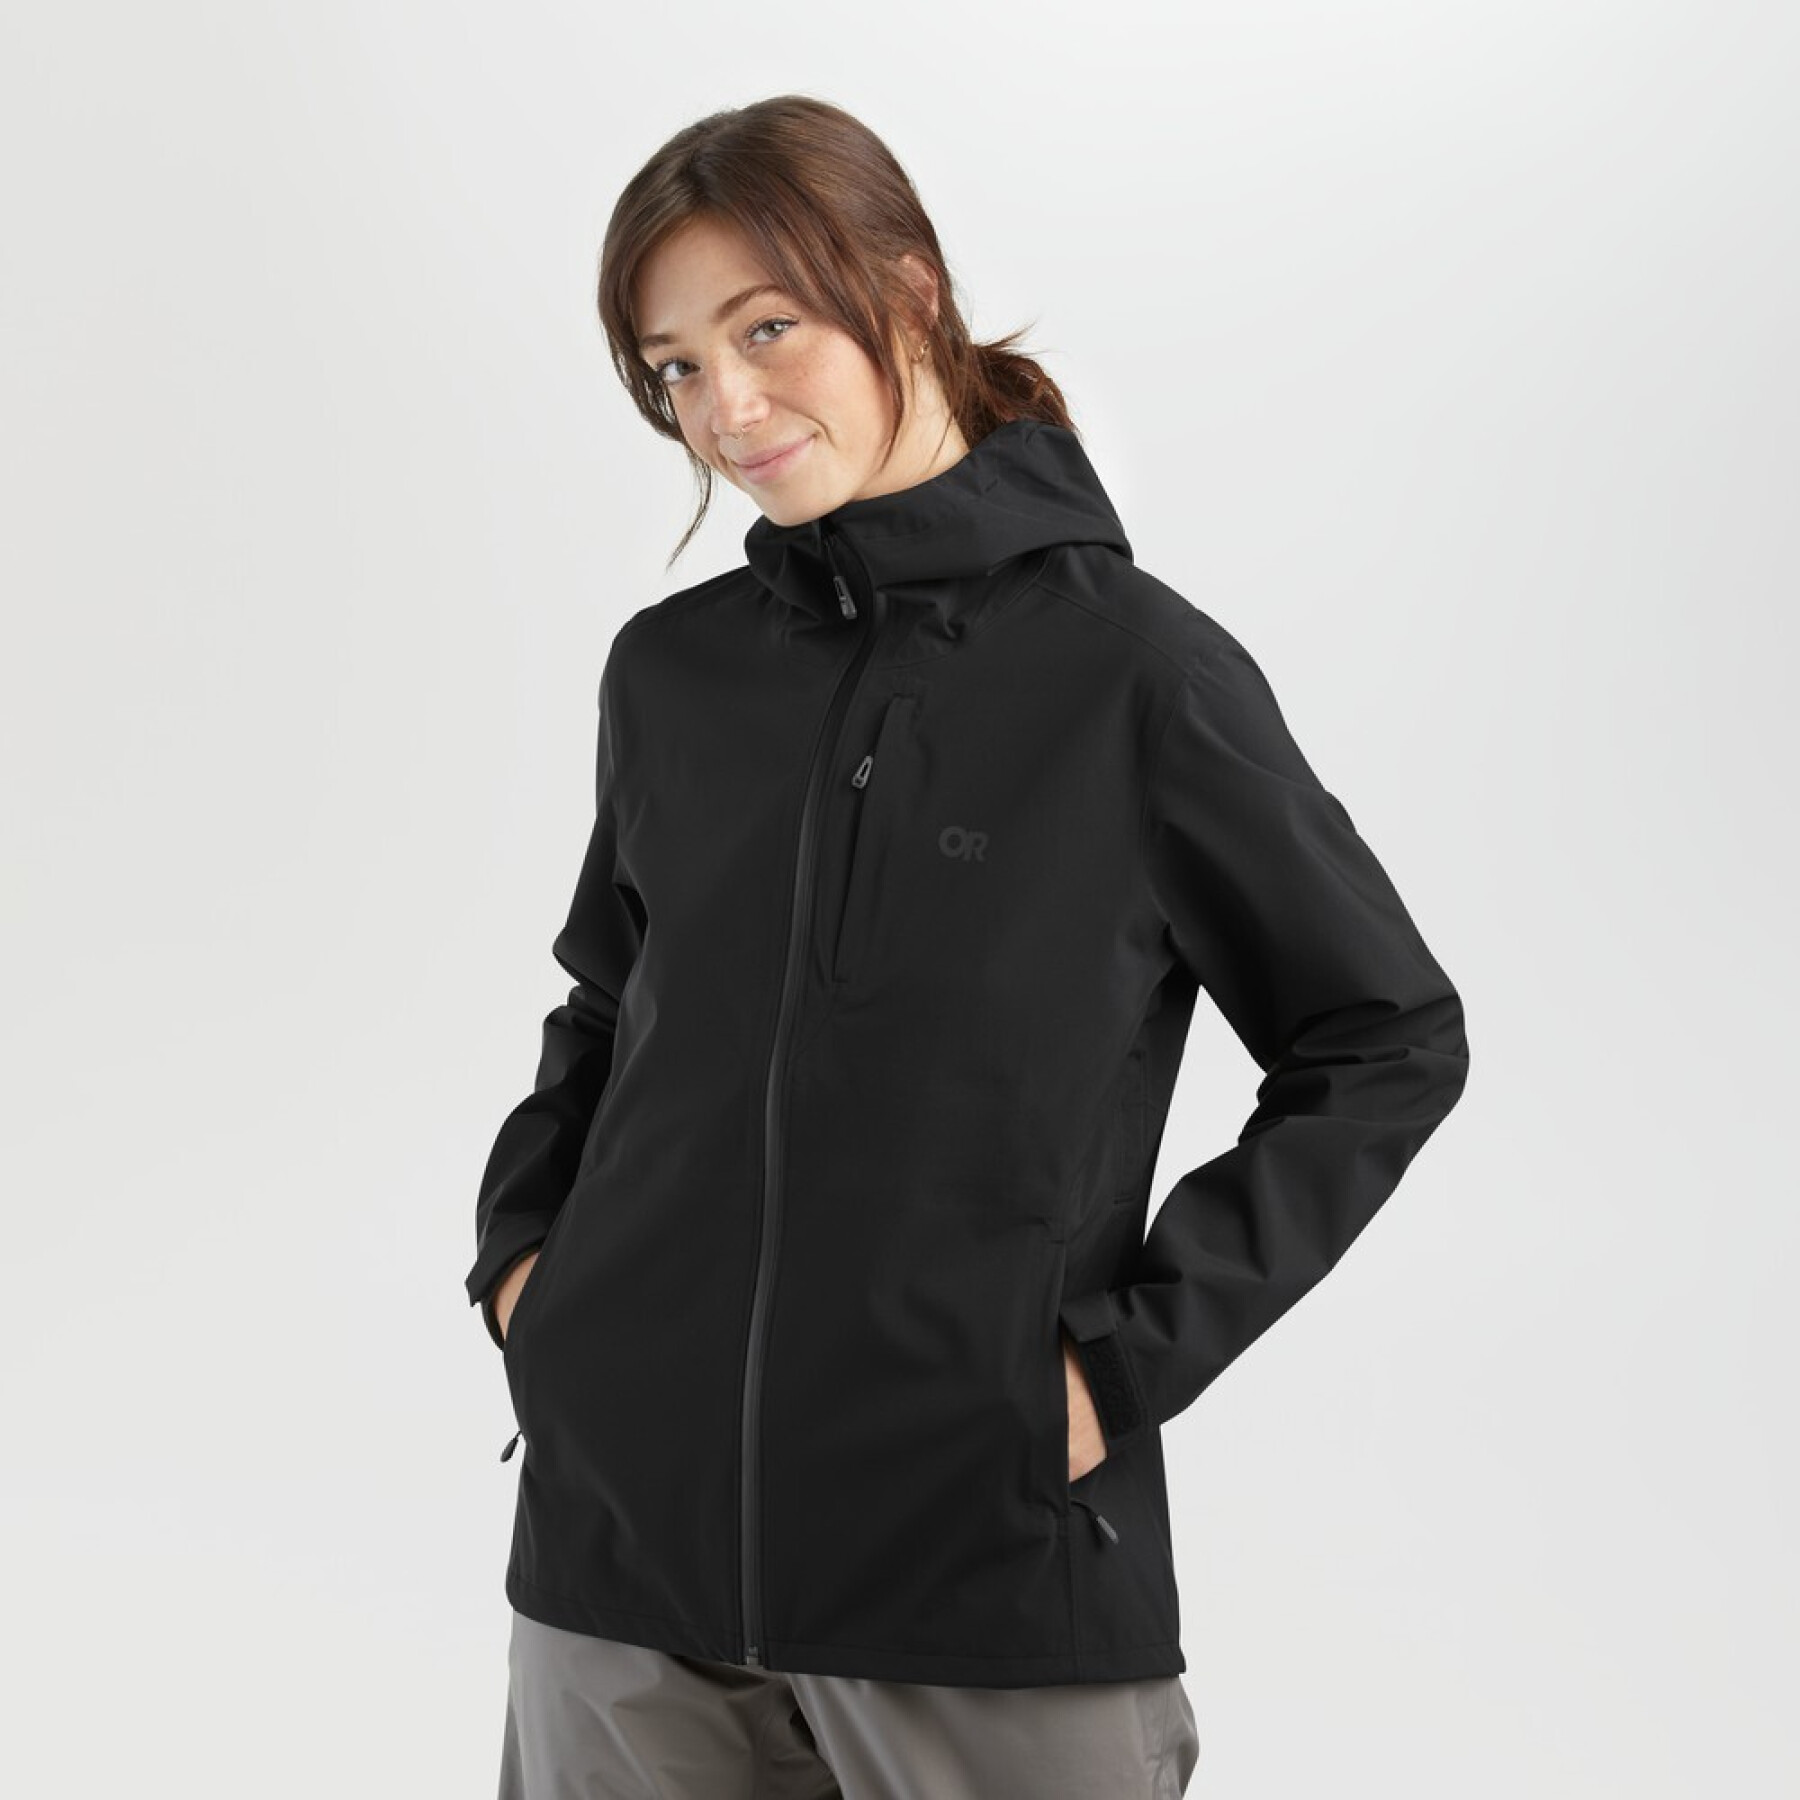 Chaqueta impermeable Outdoor Research Dryline